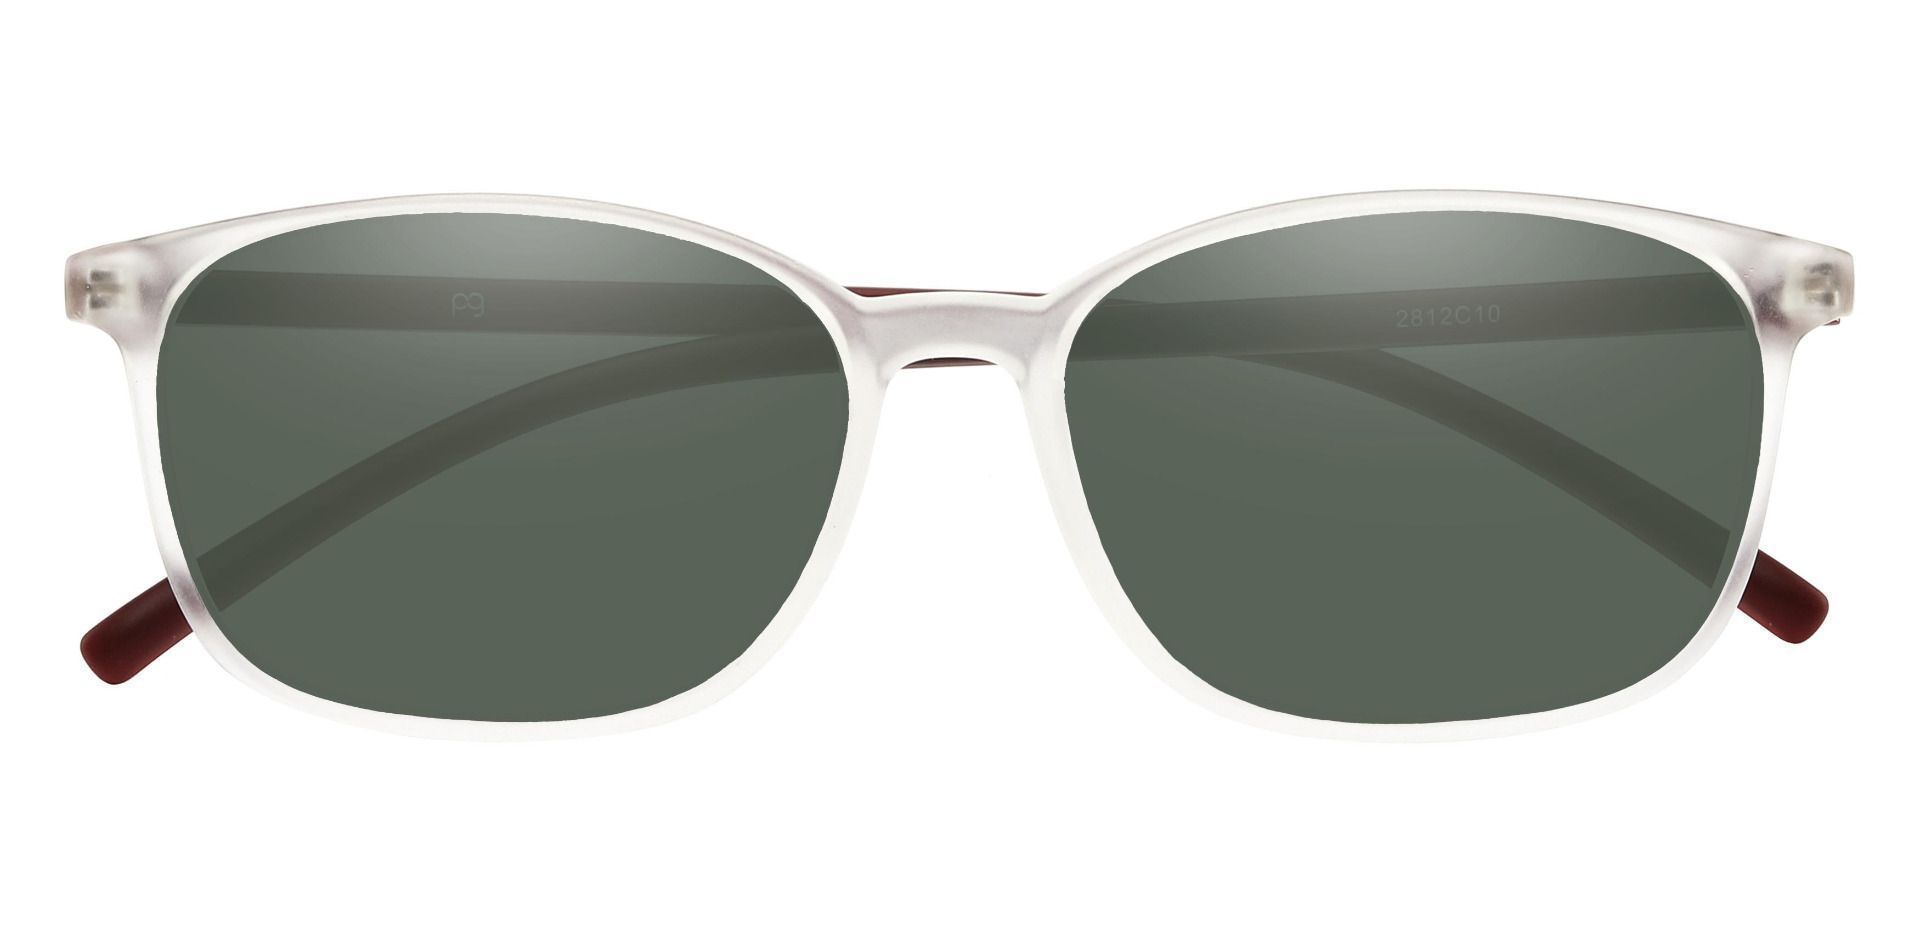 Onyx Square Non-Rx Sunglasses - Clear Frame With Green Lenses